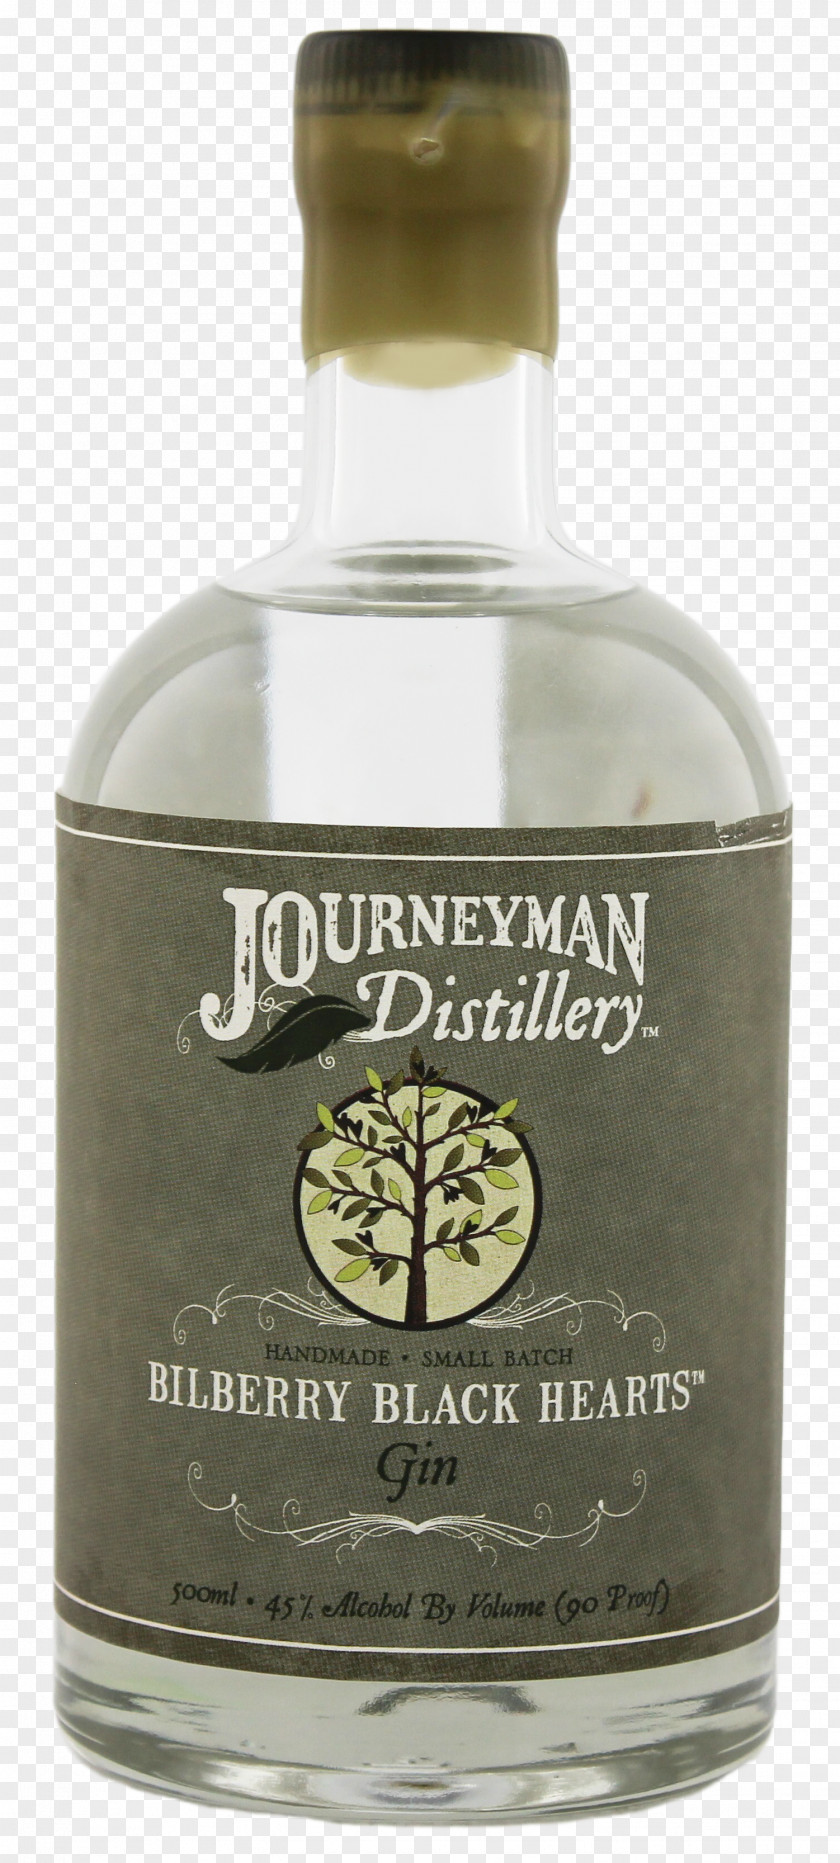 Bilberry Liqueur Journeyman Distillery Black Hearts Aged Gin 0,5 L Product PNG